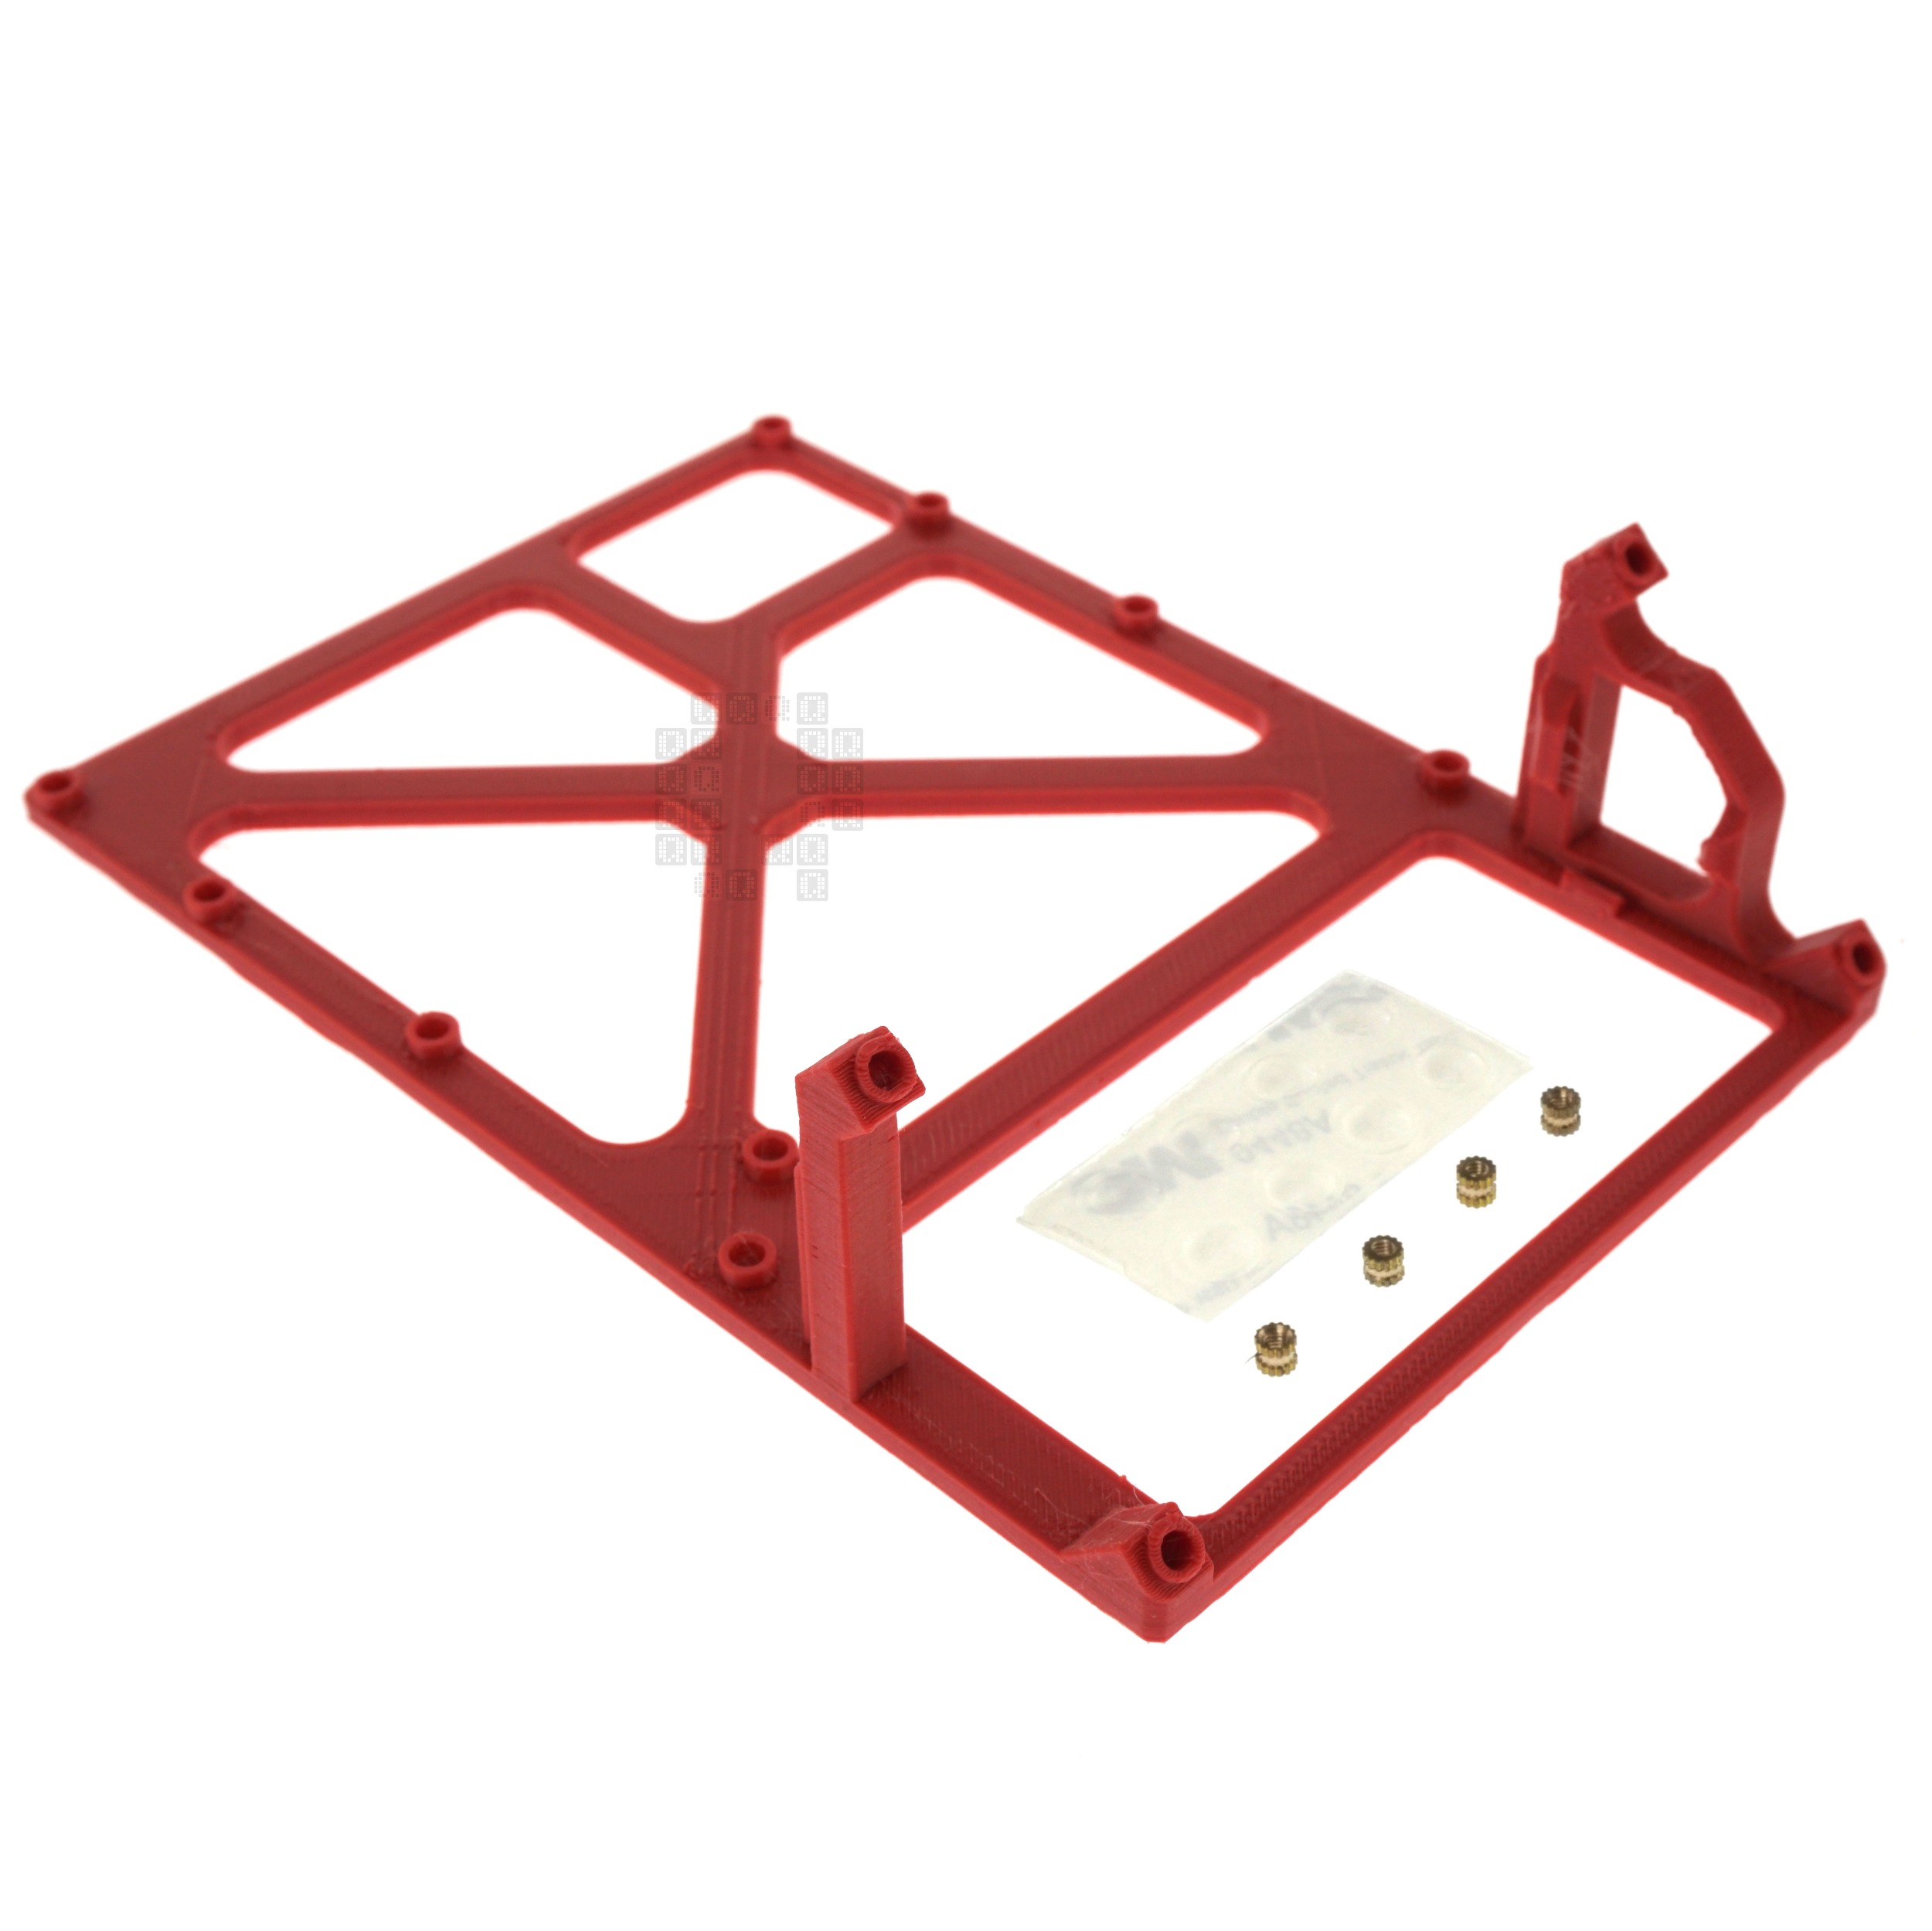 Sanni Open Source Cart Reader HW5 Main PCB Stand Frame with Battery Access, Red